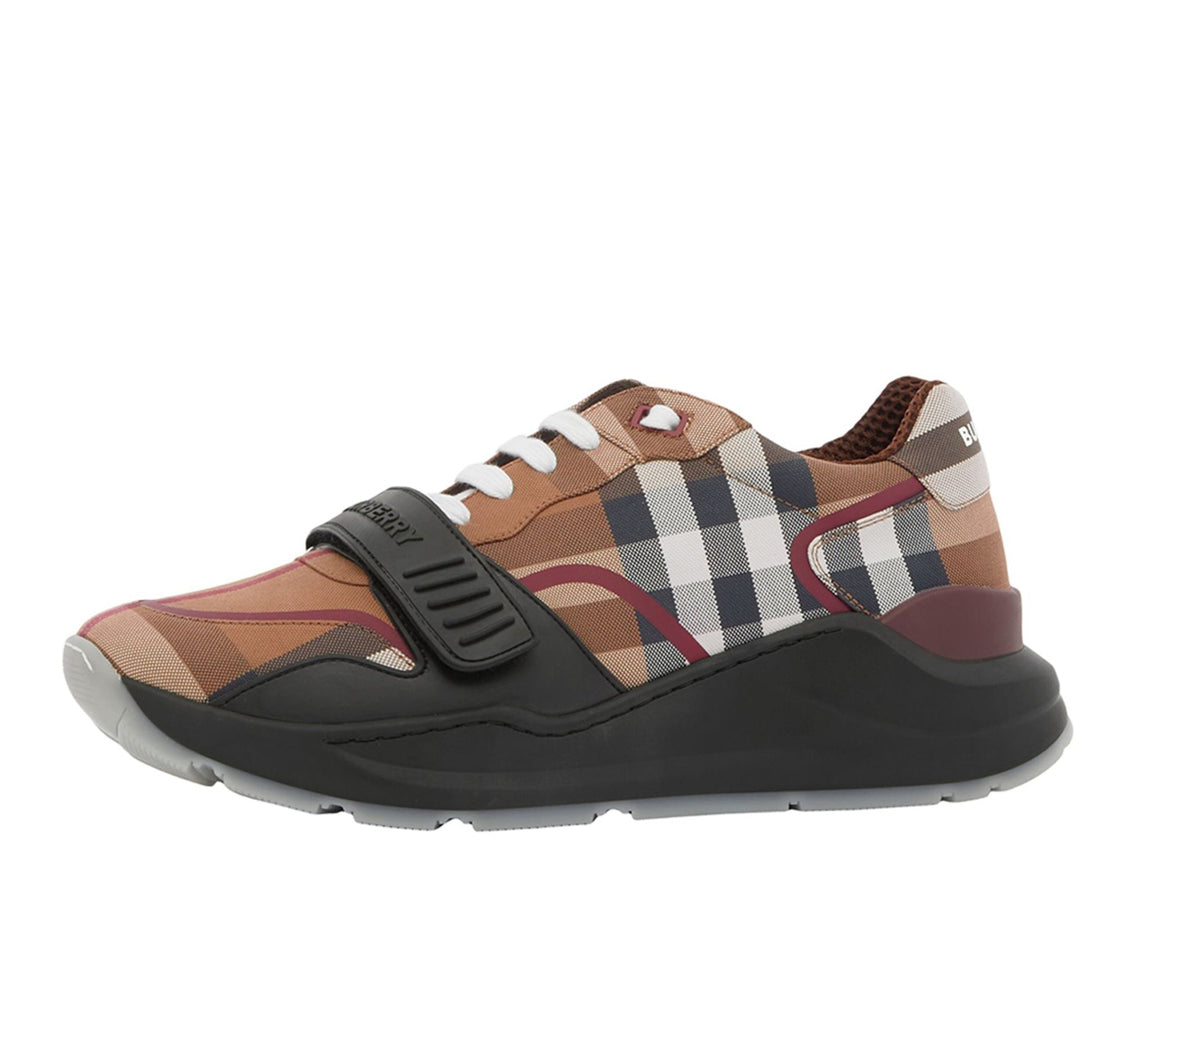 BURBERRY CHECK RAMSAY SNEAKERS - BIRCH BROWN